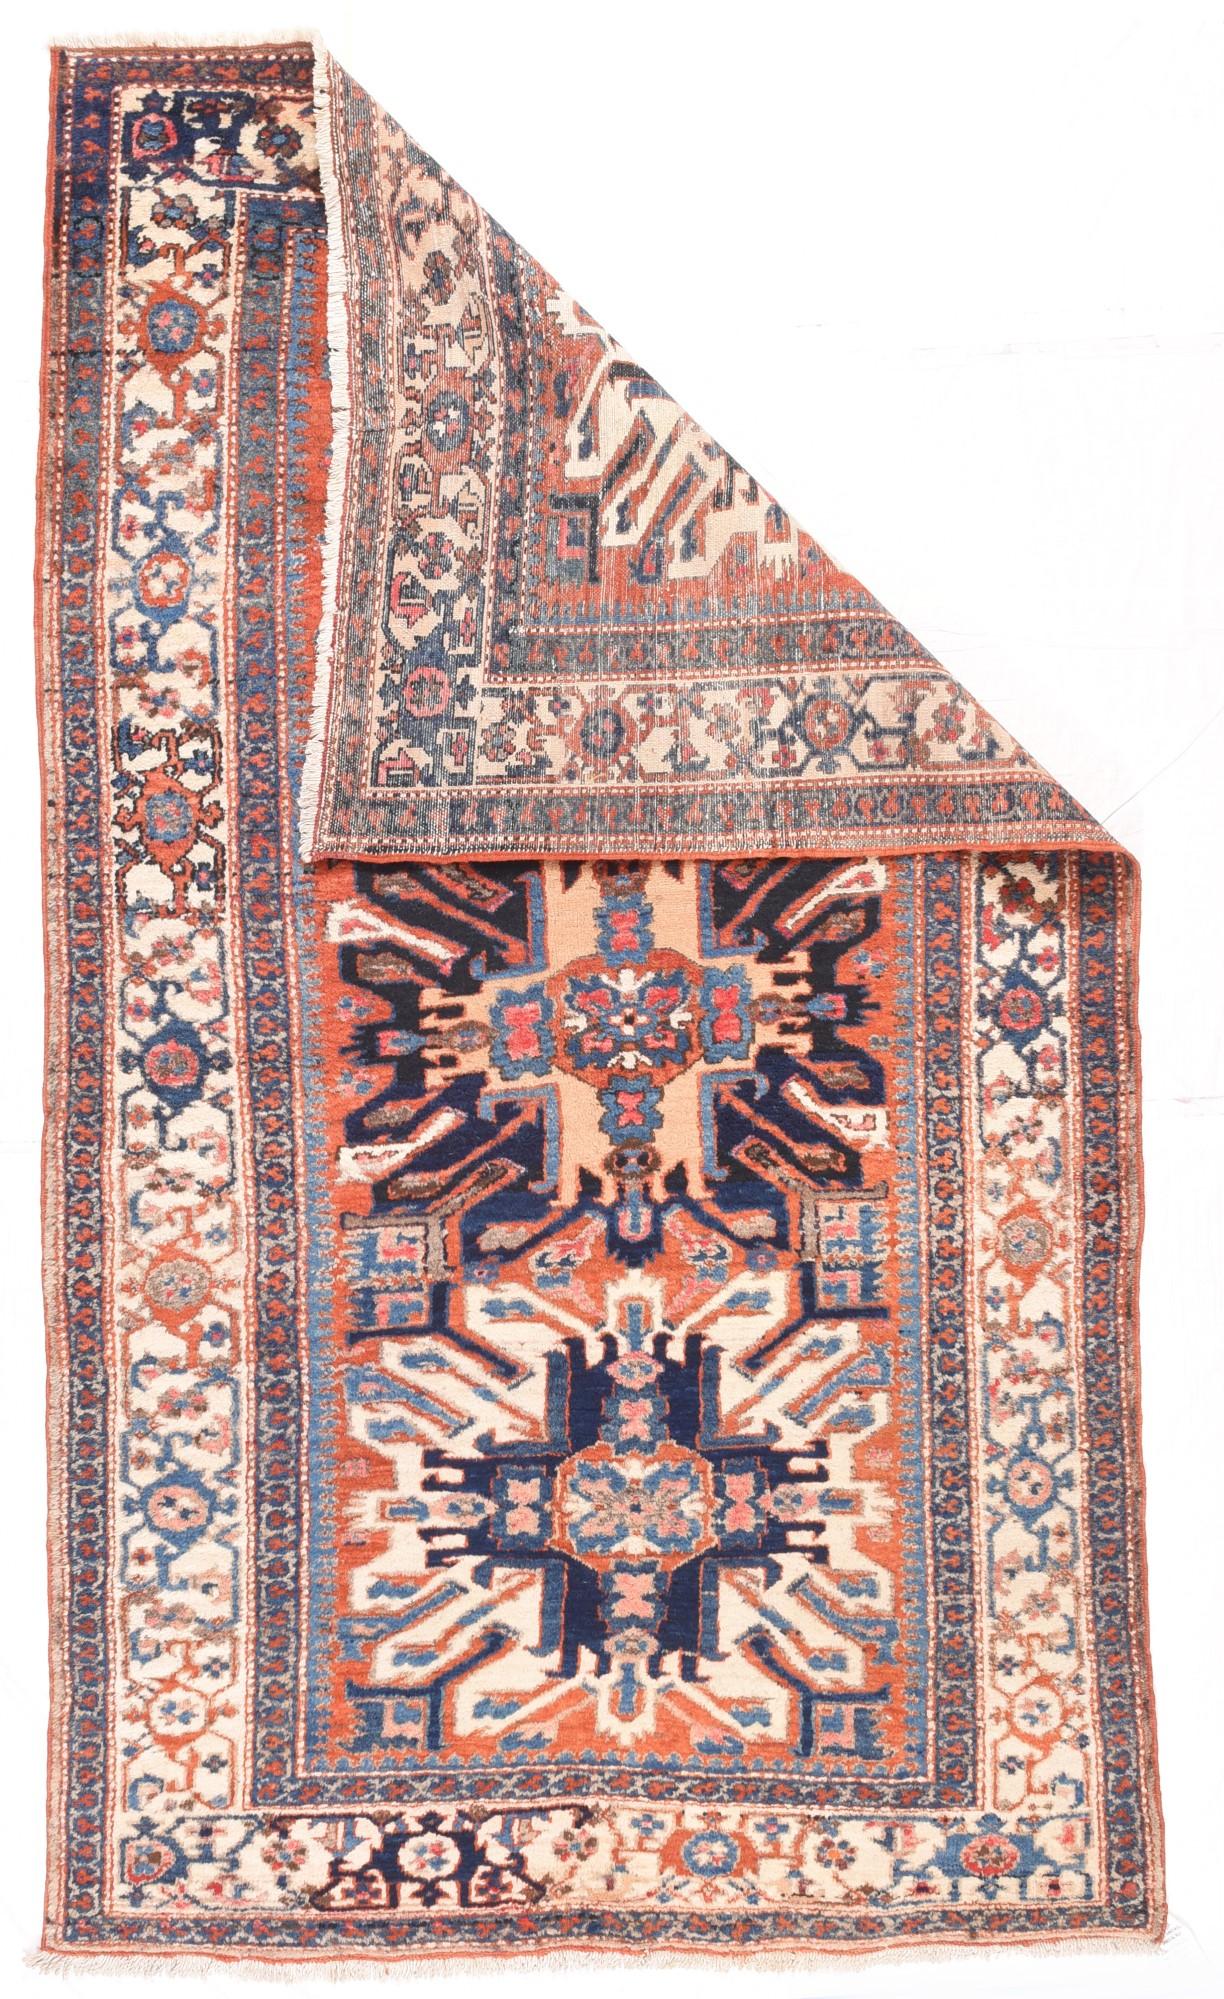 The rust madder4 field displays three “Eagle Kazak” medallions in navy and ecru. Often Caucasian Karabaghs (“Kazaks”) did not come in the appropriate sizes or colourways and the weavers in the Karaja area within the Heriz district were able to fill